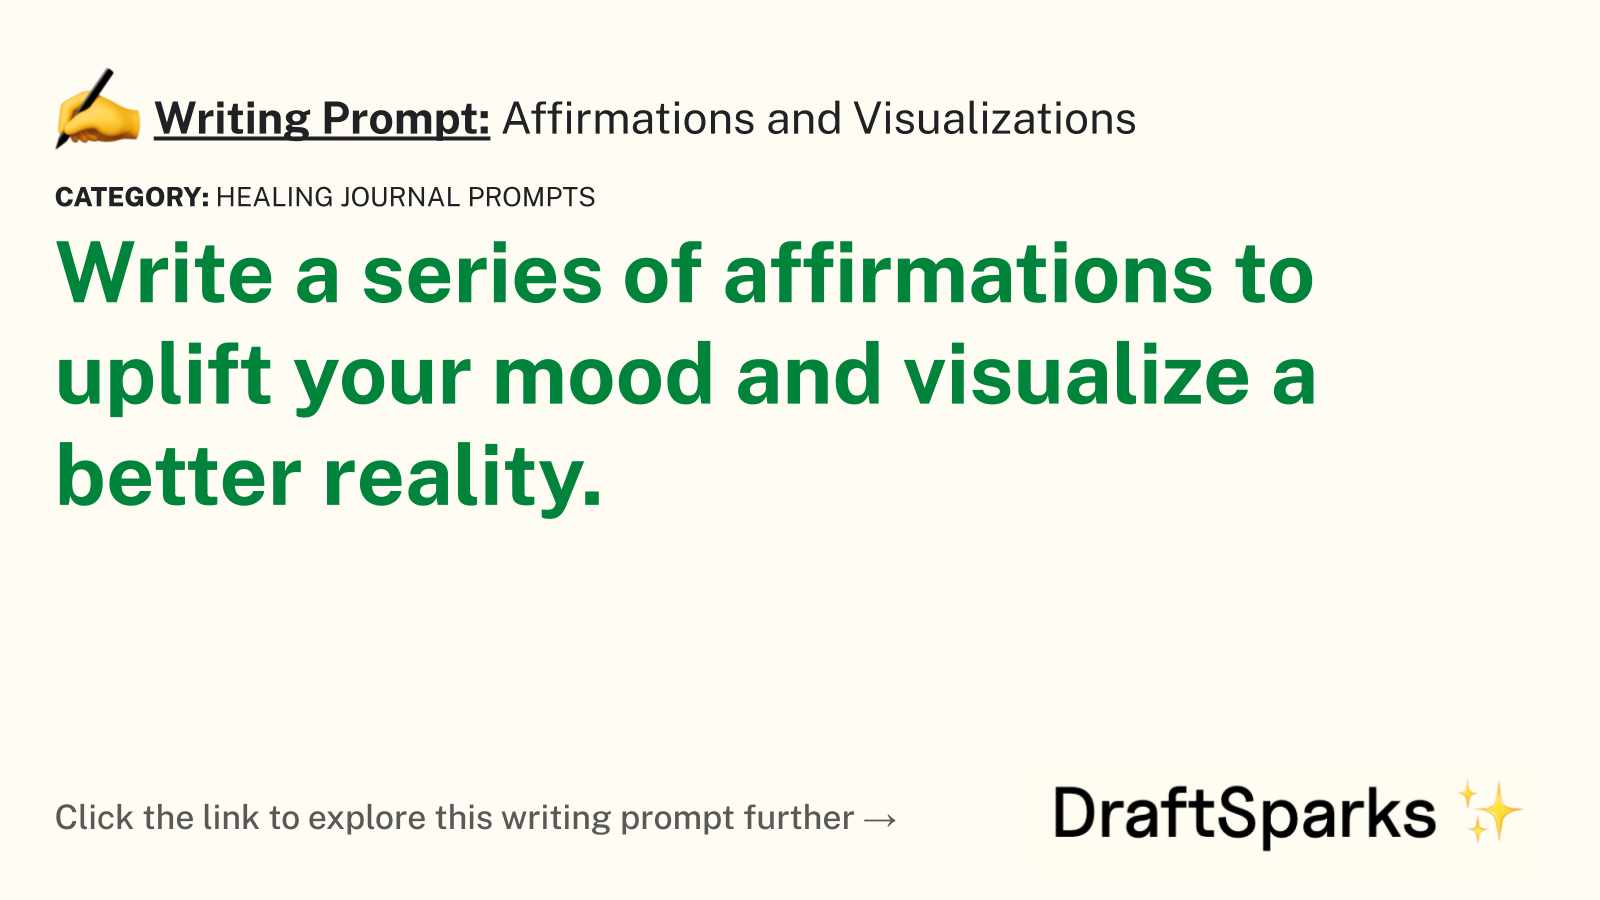 Affirmations and Visualizations